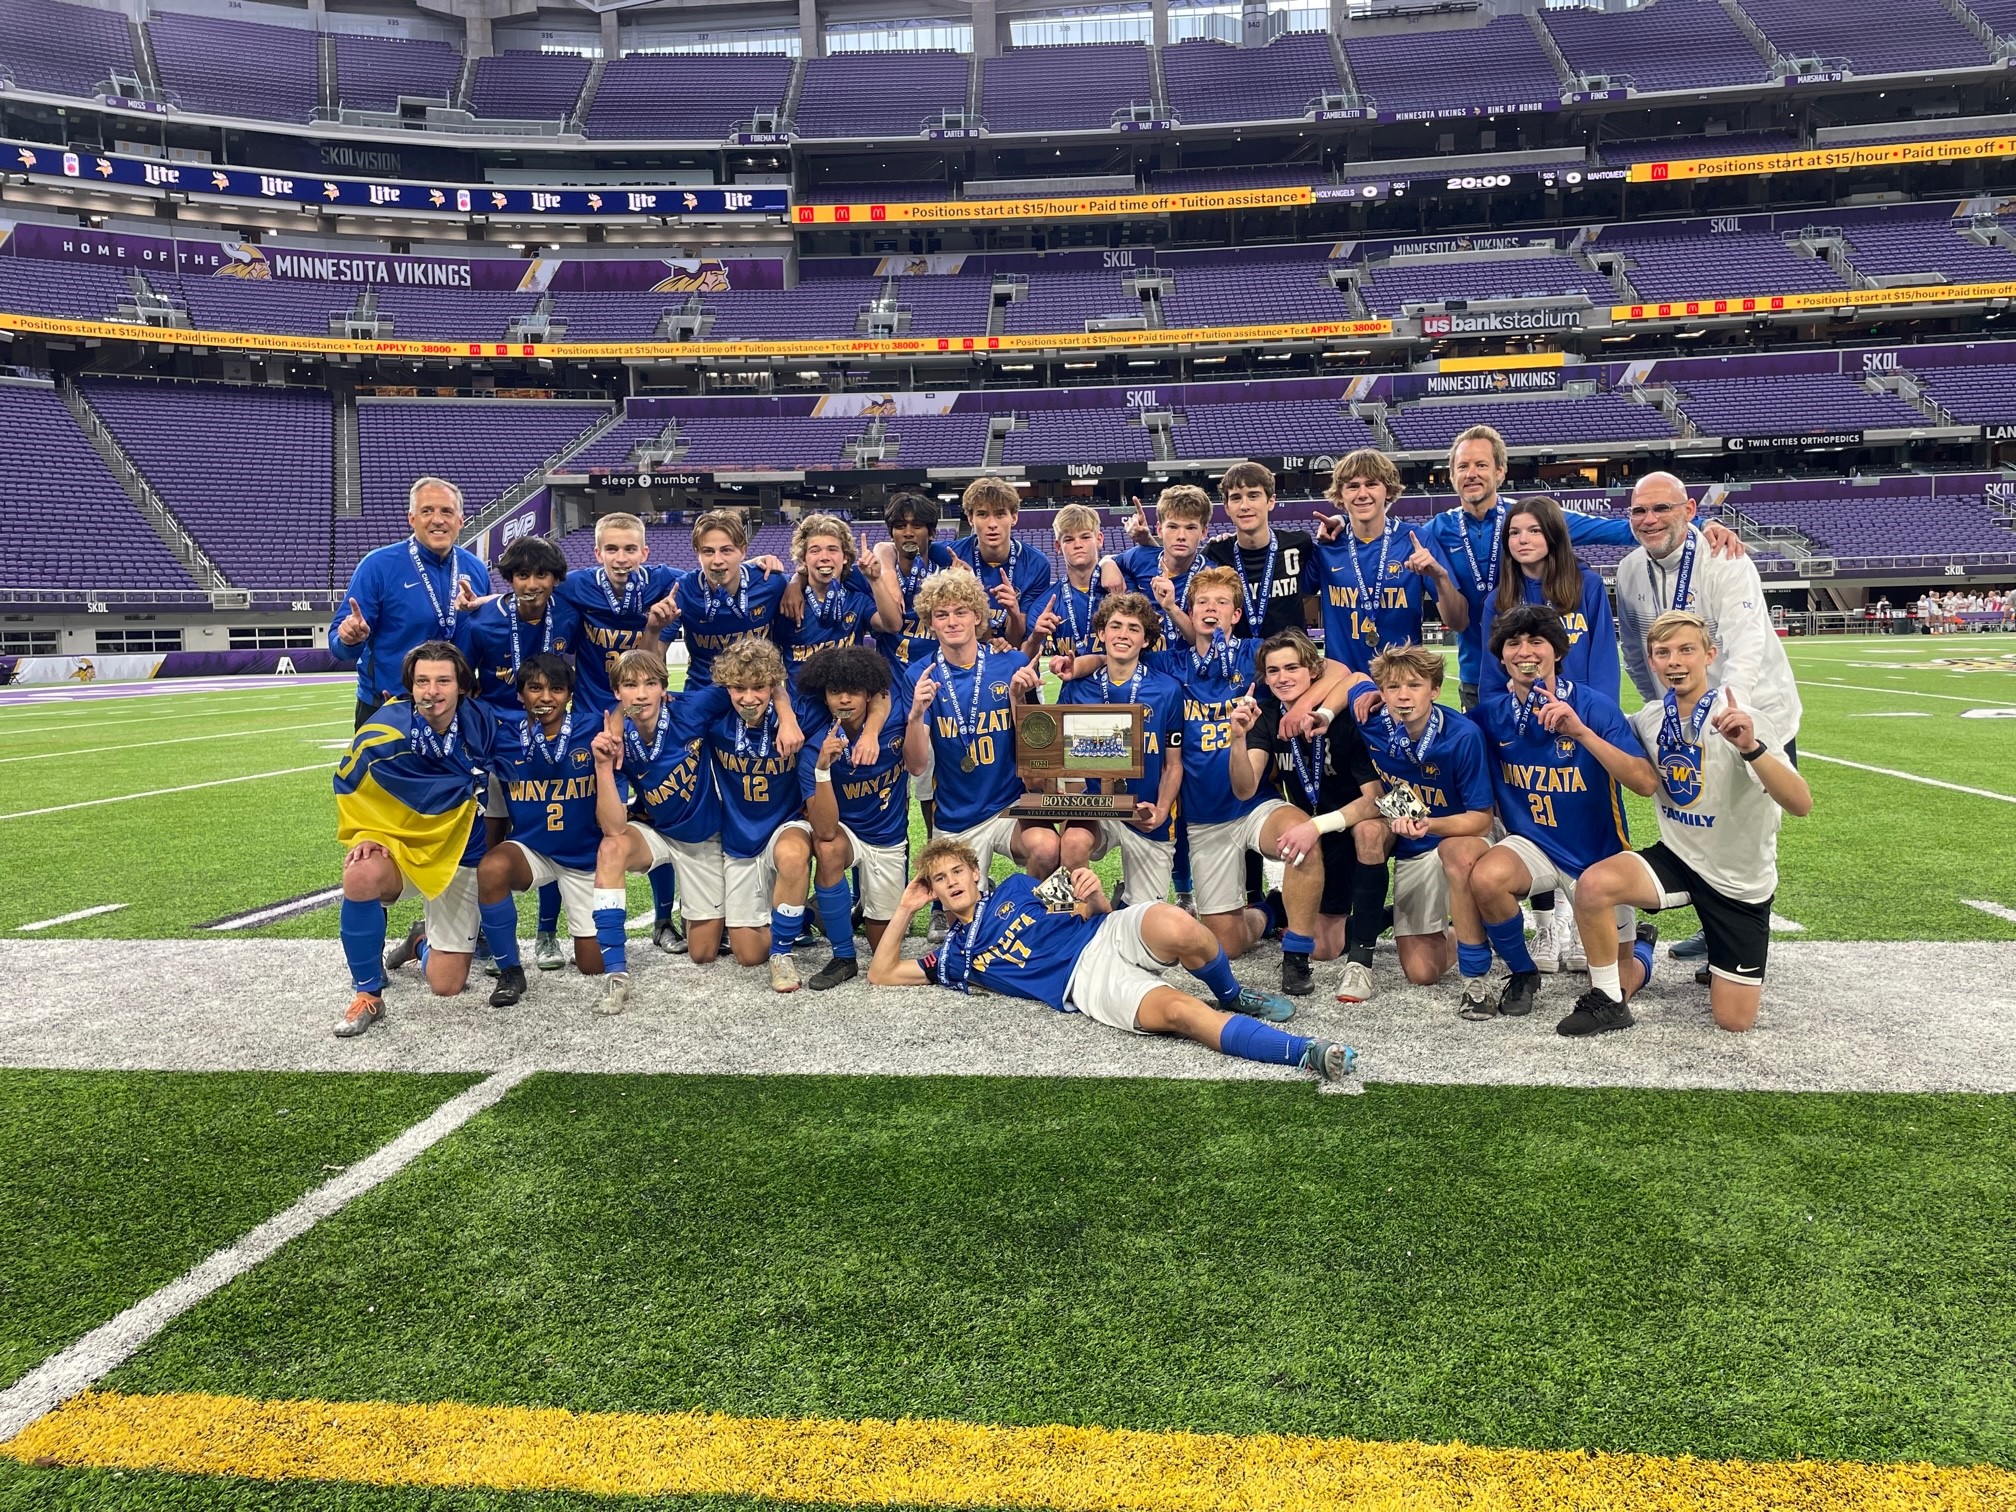 Wayzata scored two late goals to defeat Woodbury 3-2 in OT for the Class AAA Boys Soccer state championship 